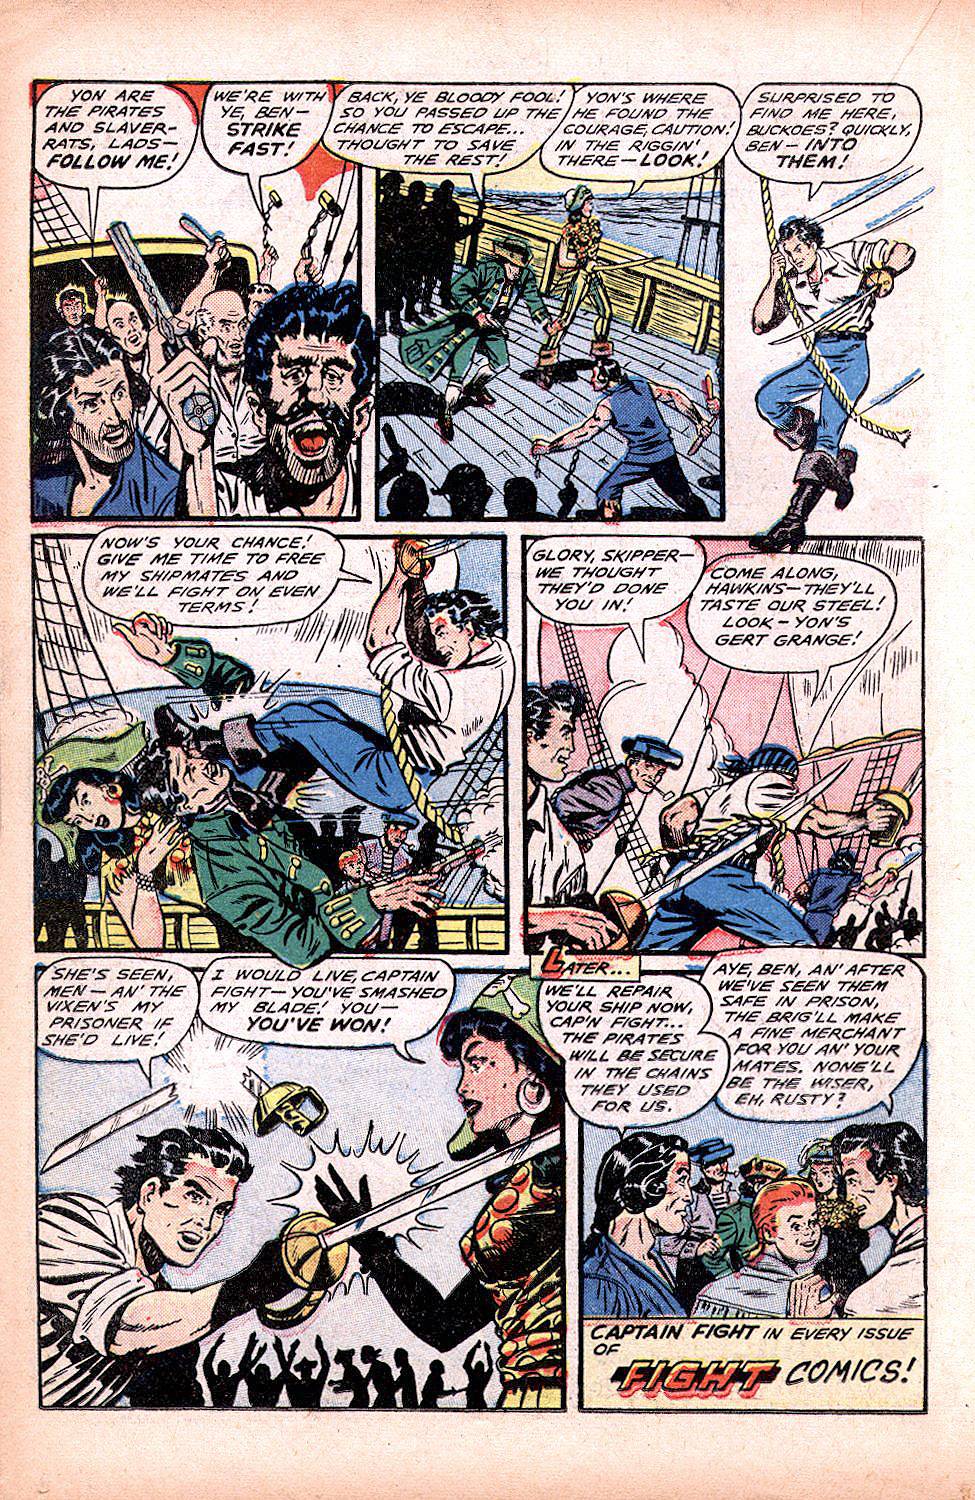 Fight Comics 67 Read Fight Comics Issue 67 Page 26